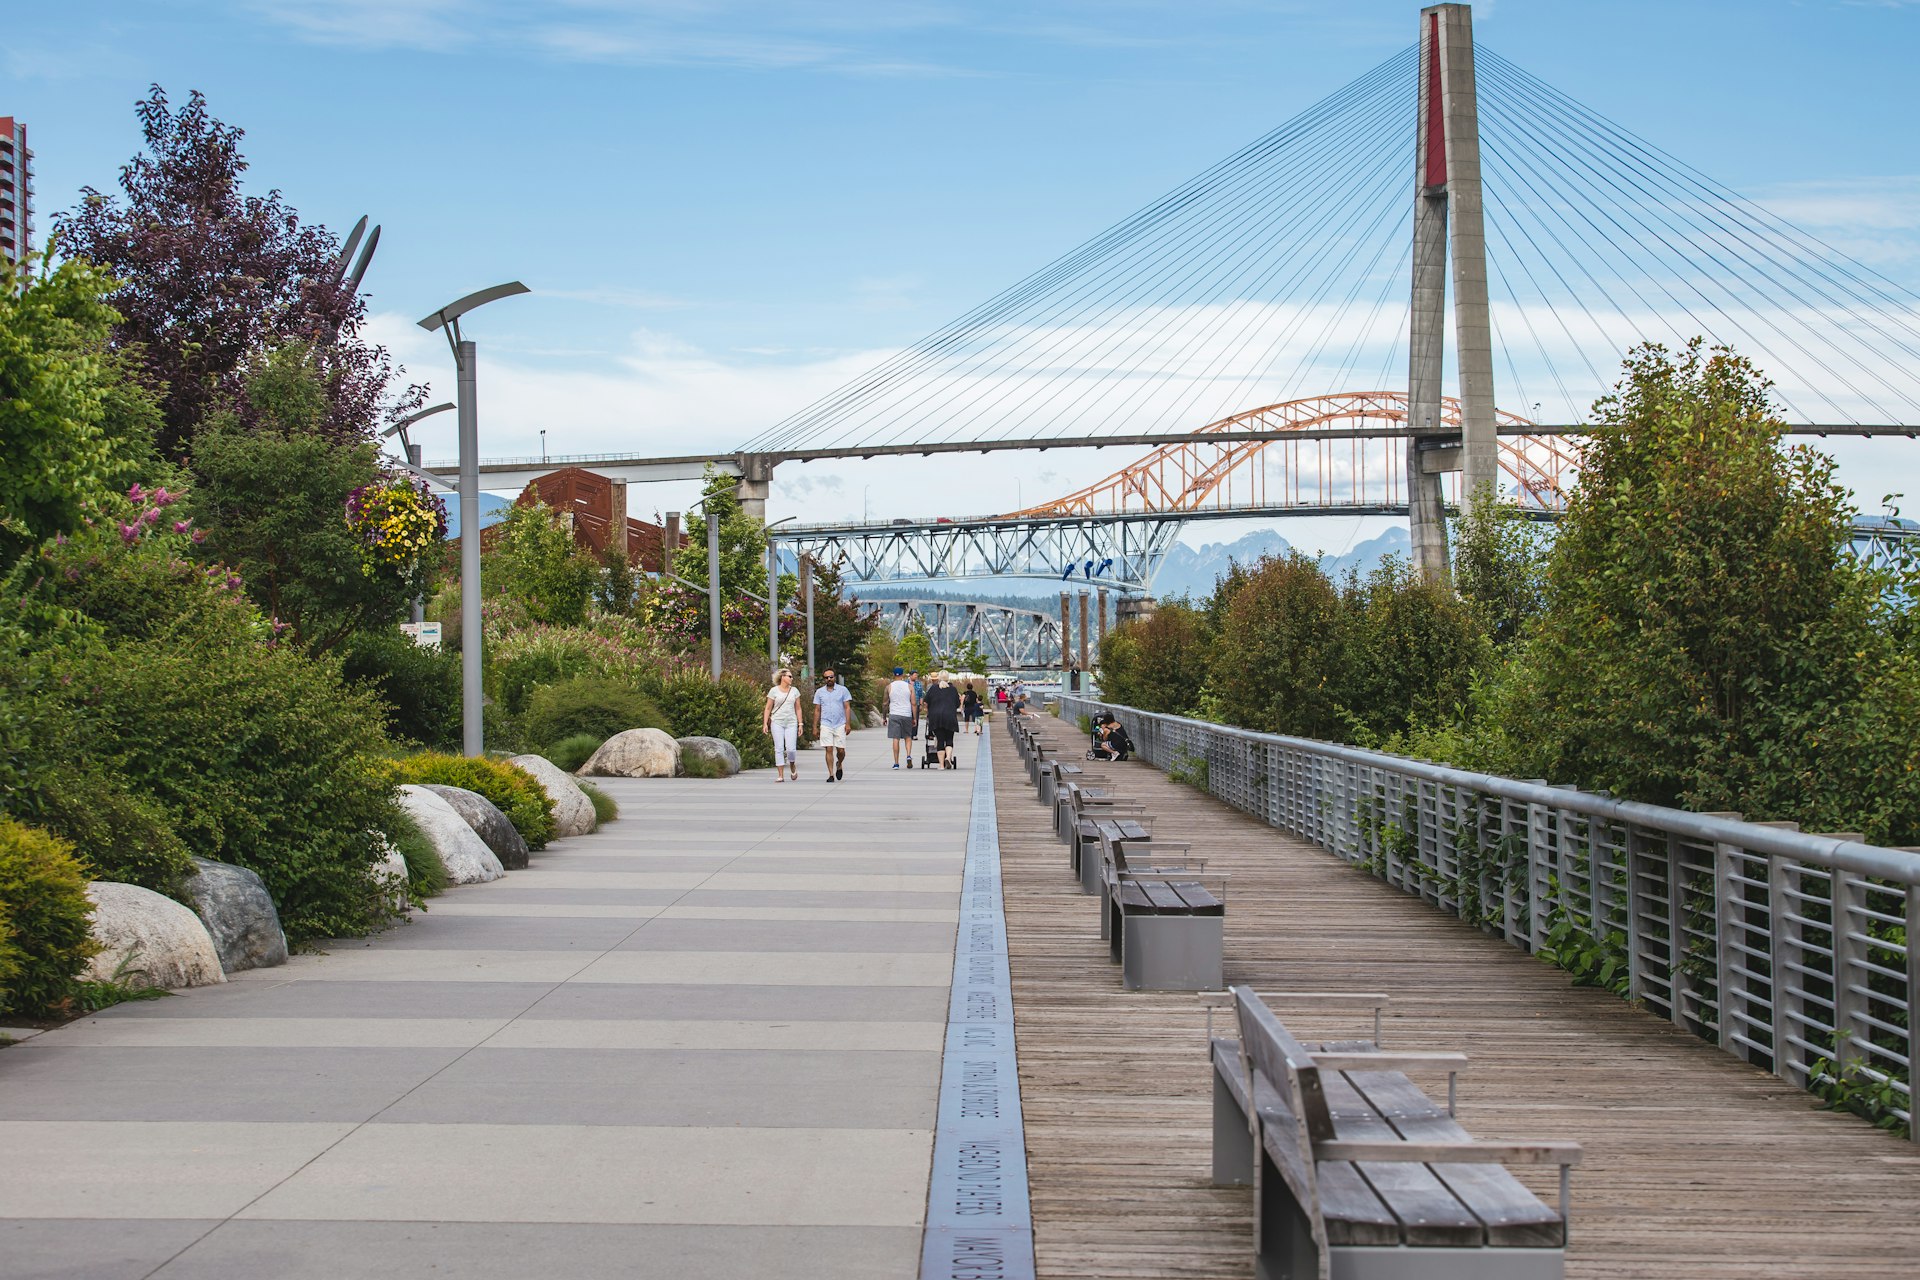 People walk along New Westminster Pier Park with the Port Mann Bridge in the background, New Westminster, British Columbia, Canada